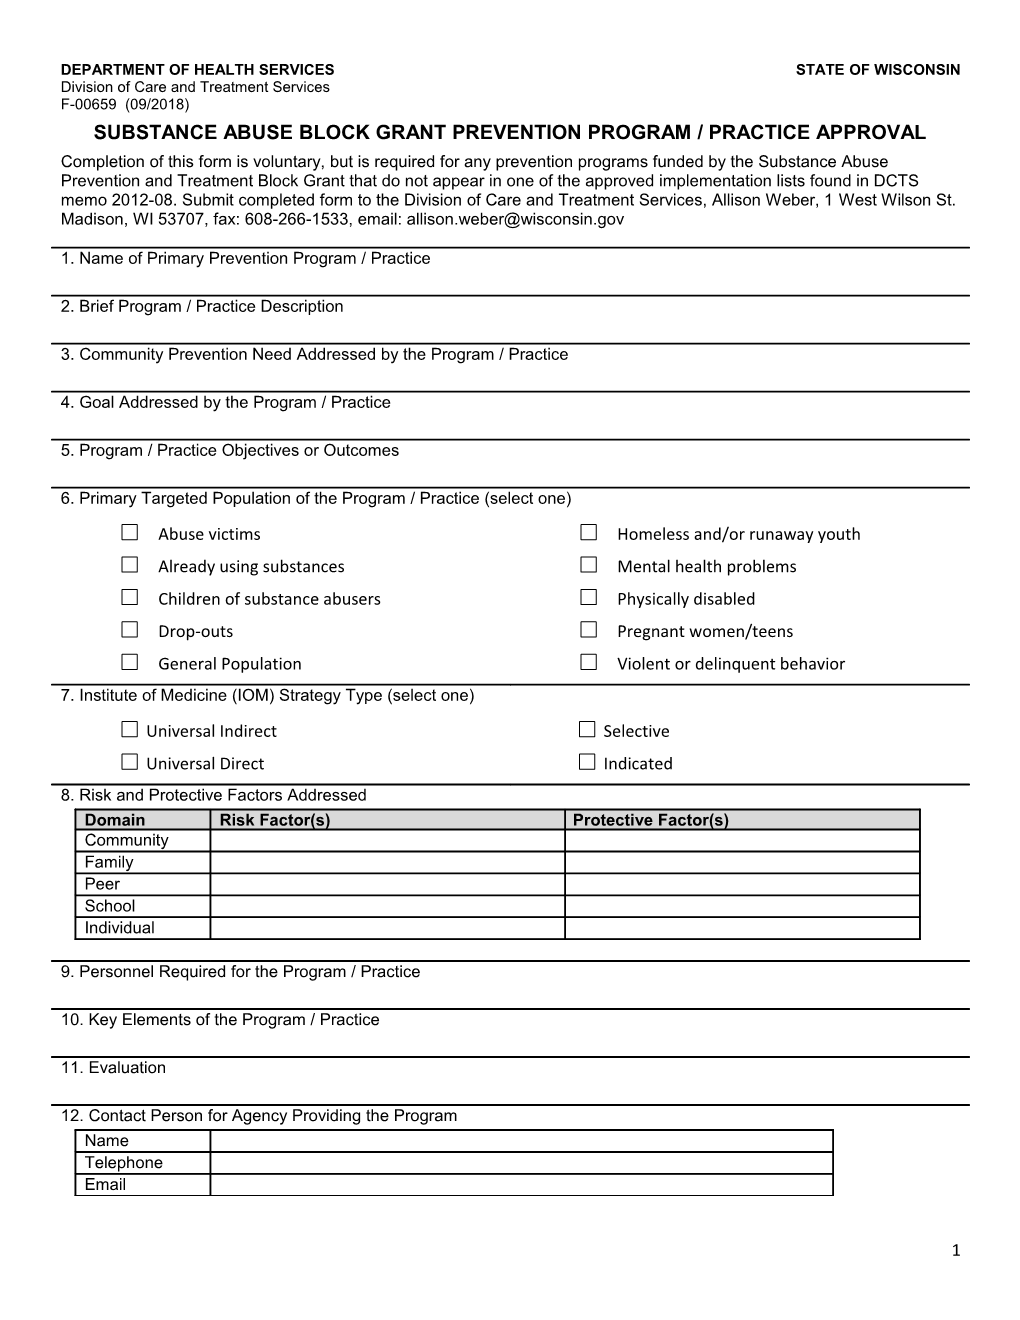 Substance Abuse Block Grant Prevention Program/Practice Approval, F-00659